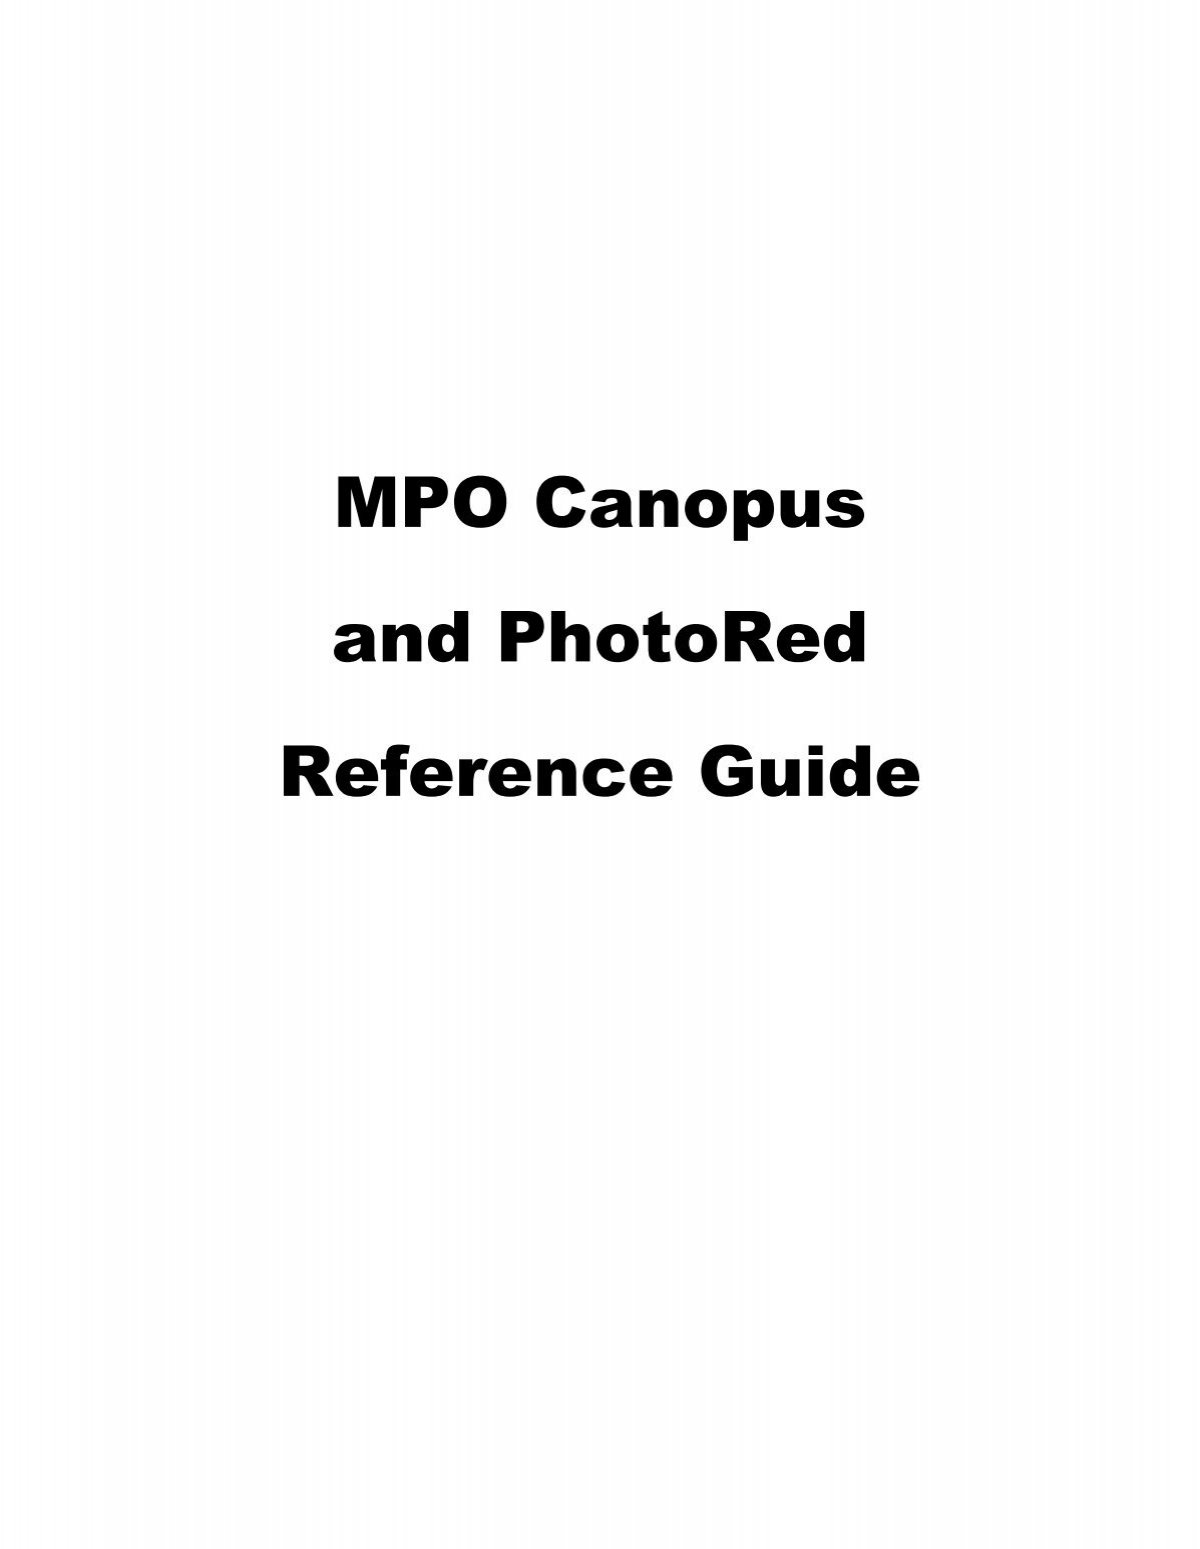 Canopus Photometry Software